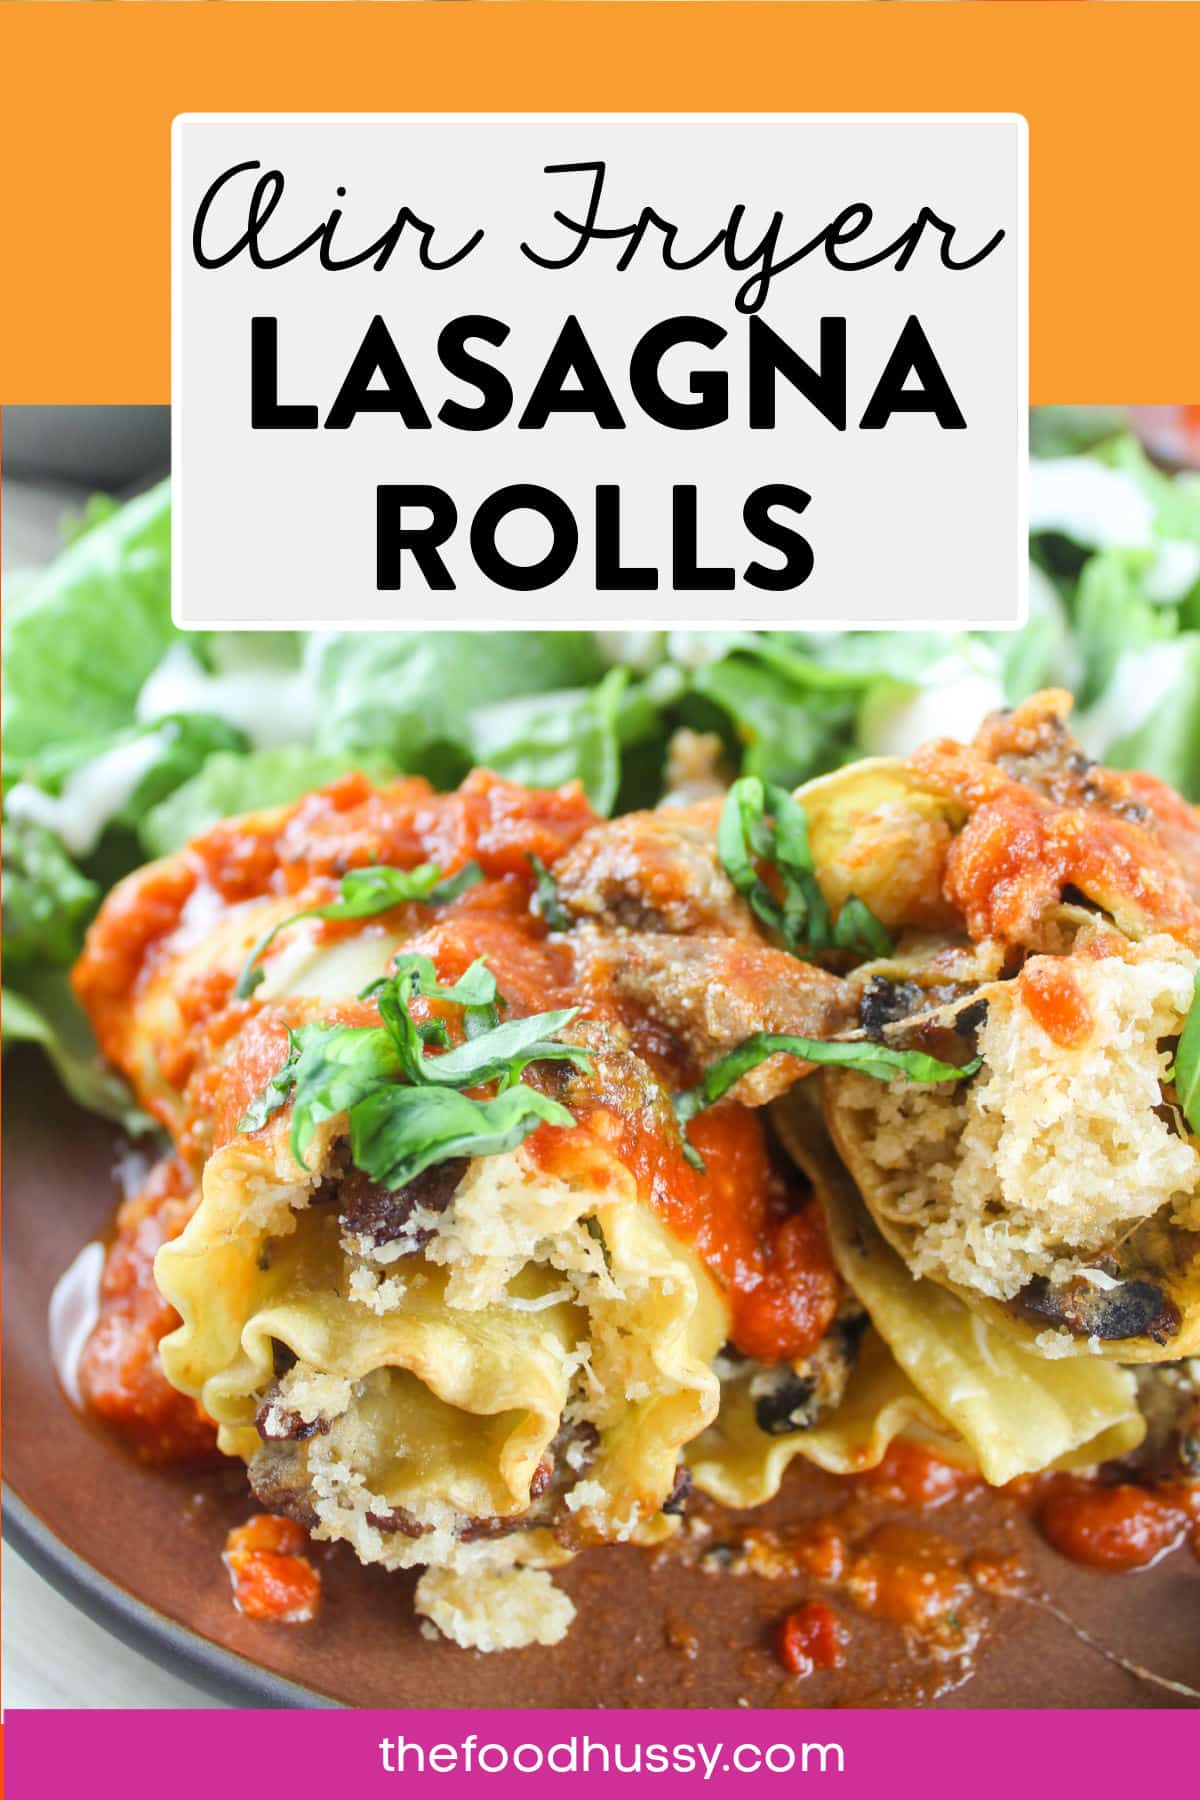 Air Fryer Lasagna Rolls is a delicious way to have cheesy, comforting, saucy lasagna in less than 30 minutes! Full of sausage, mushrooms and cheese - lasagna rolls are an easy weeknight meal!  via @foodhussy